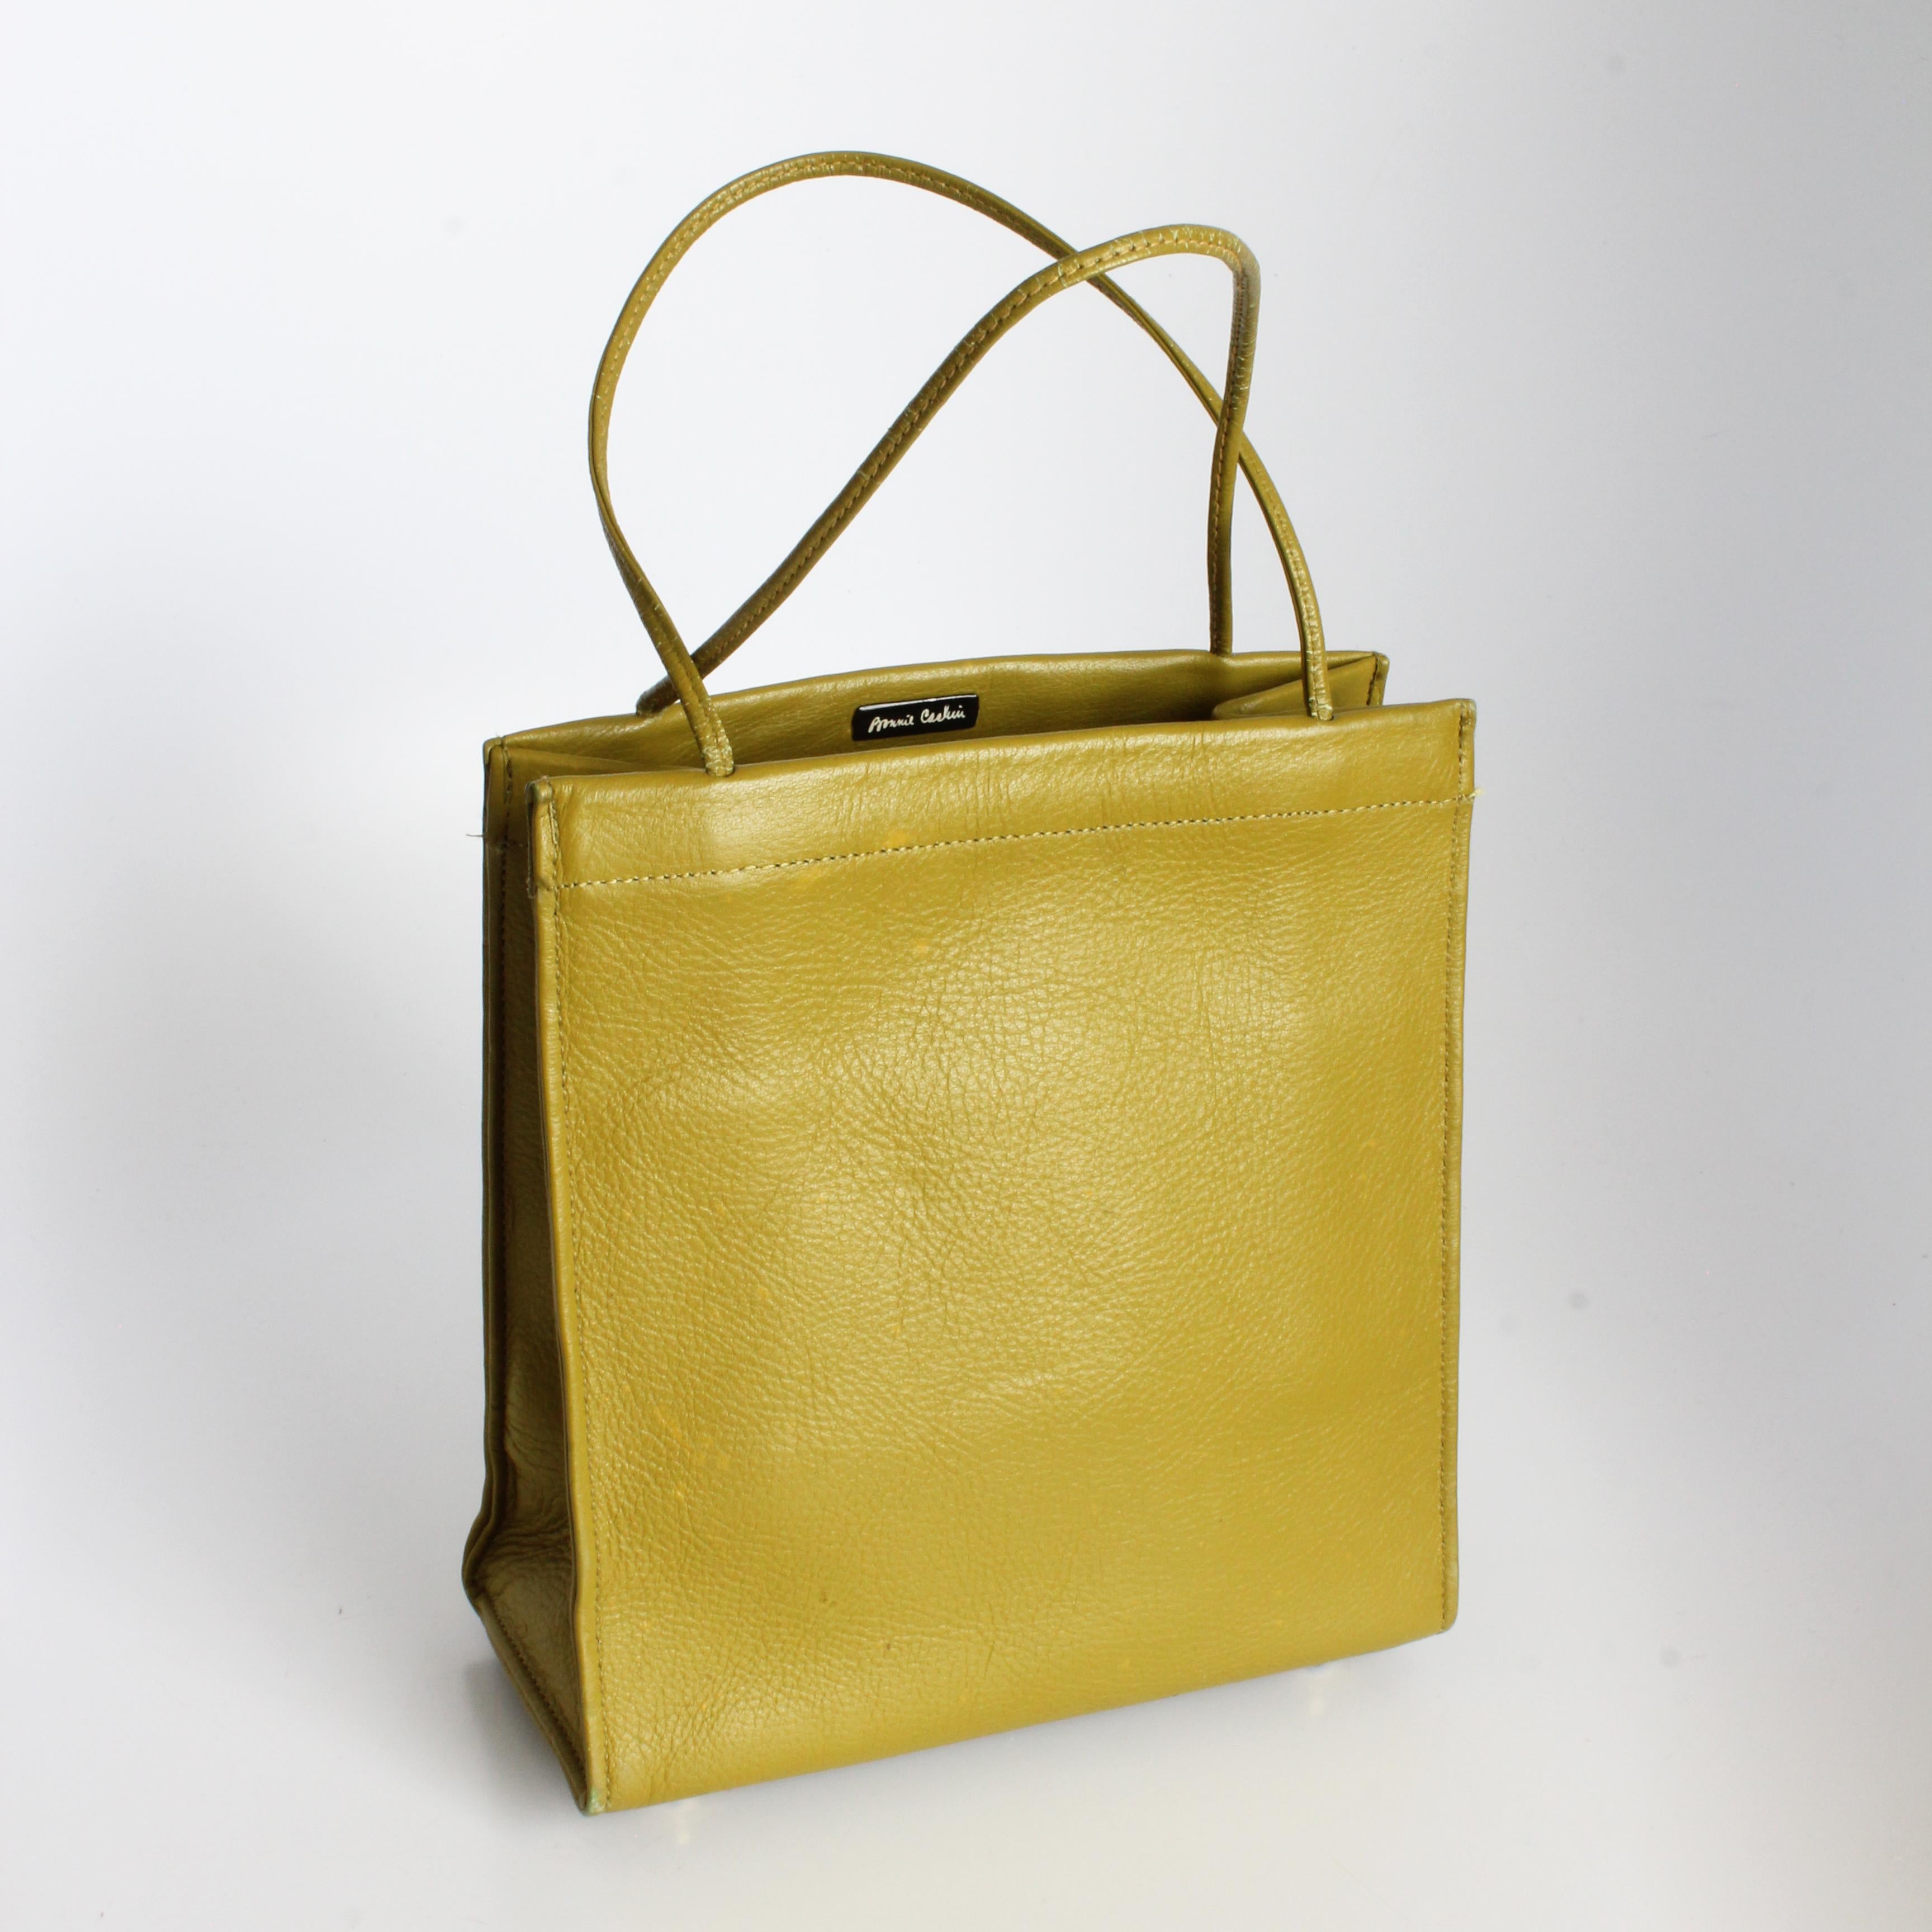 Bonnie Cashin for Coach Tiny Shopping Bag Tote Mimosa Leather Rare Vintage 1960s For Sale 6